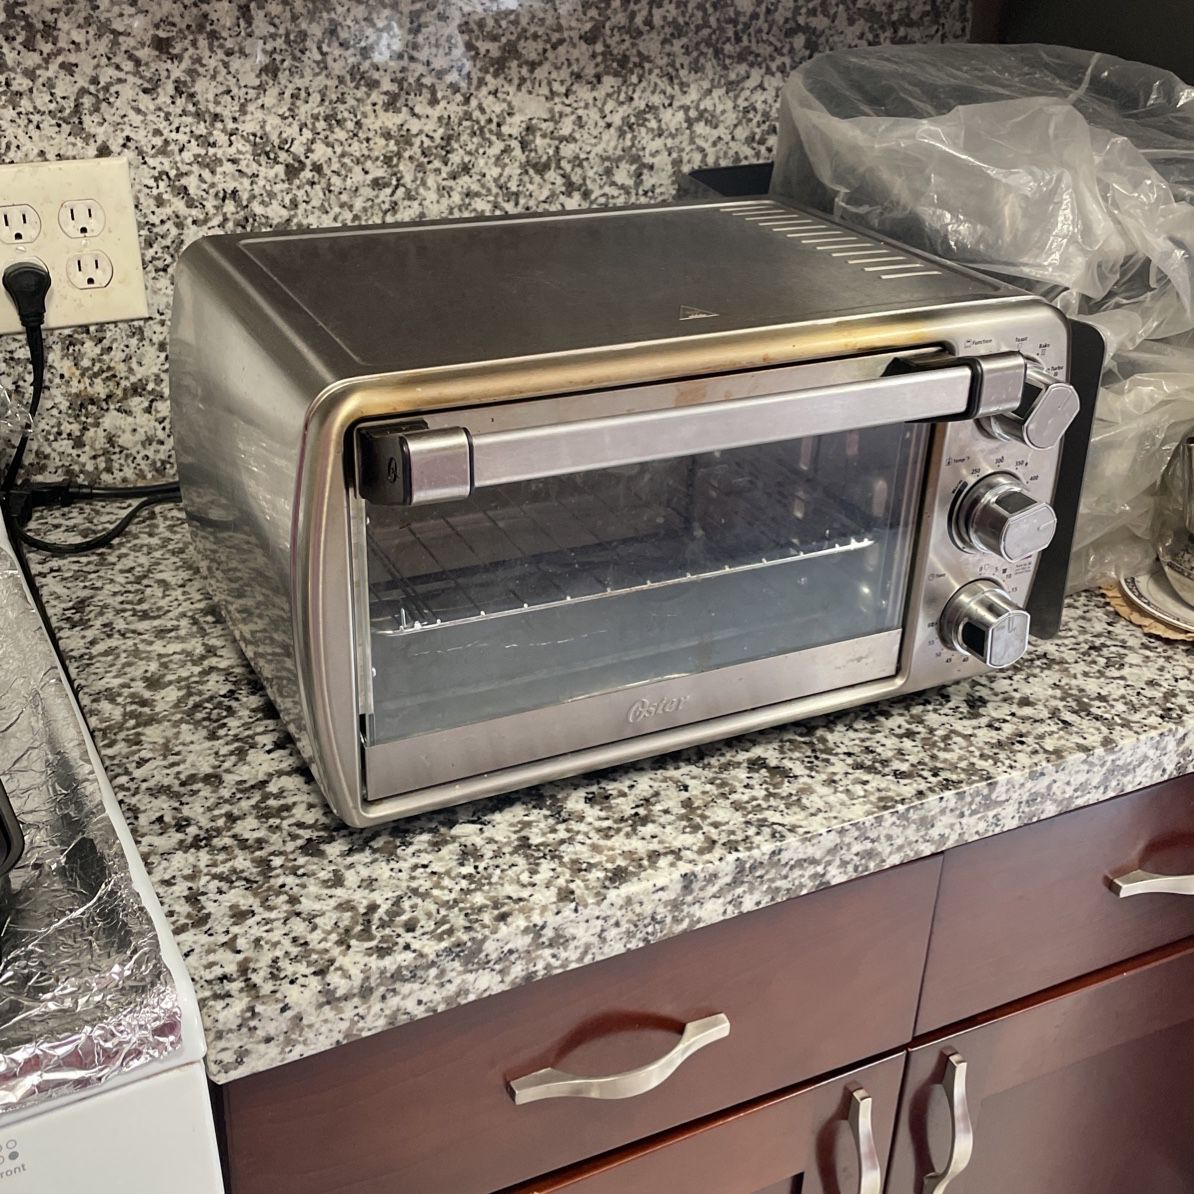 Like New] Oster Extra Large Toaster Oven for Sale in San Diego, CA - OfferUp